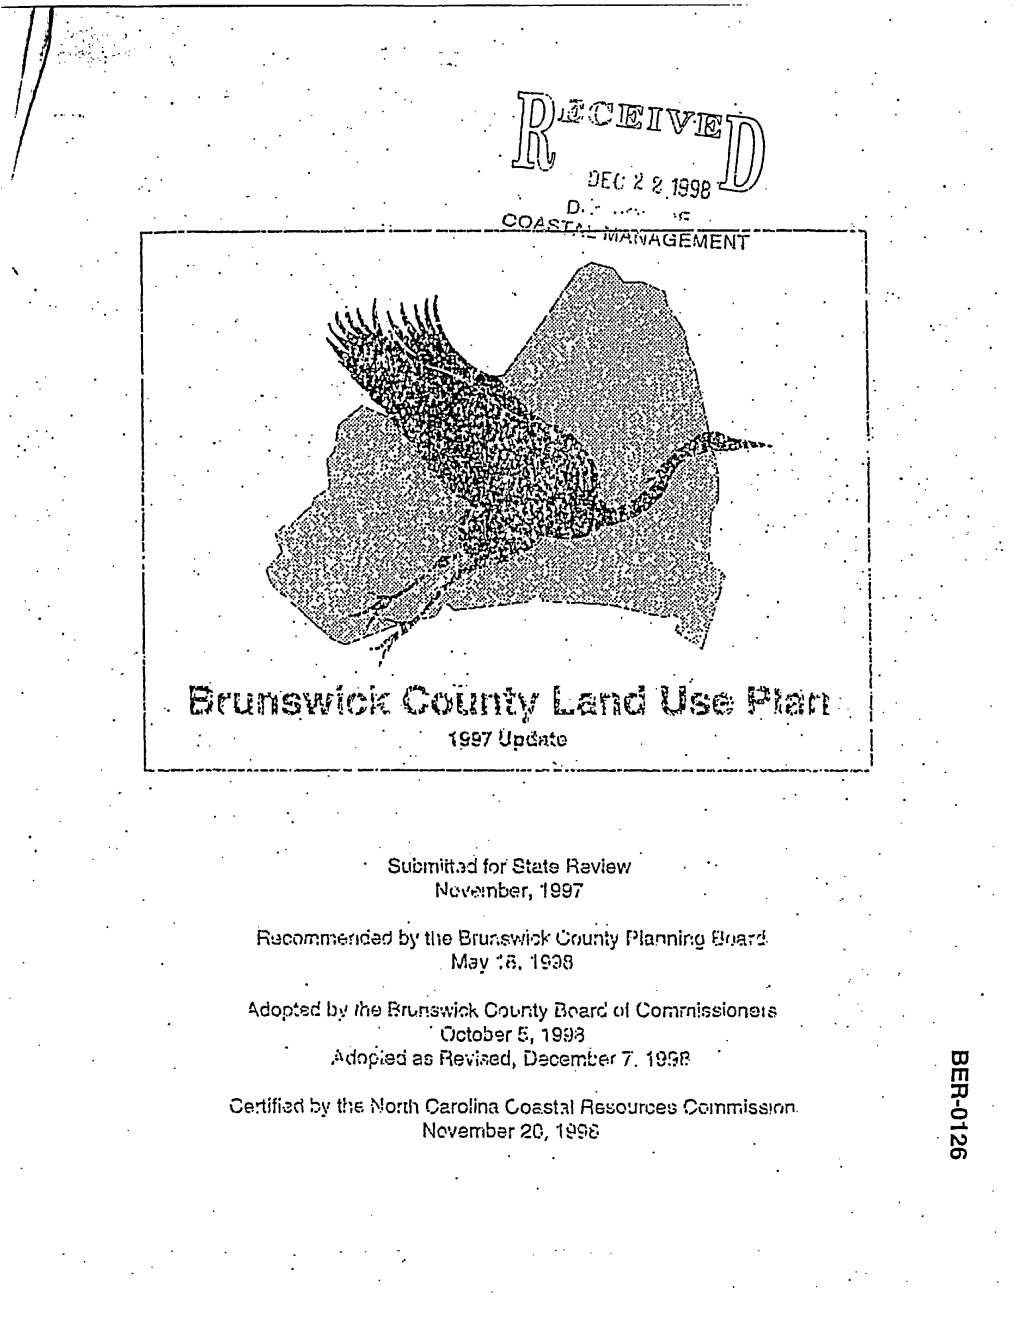 Review of License Renewal Application for Brunswick Units 1